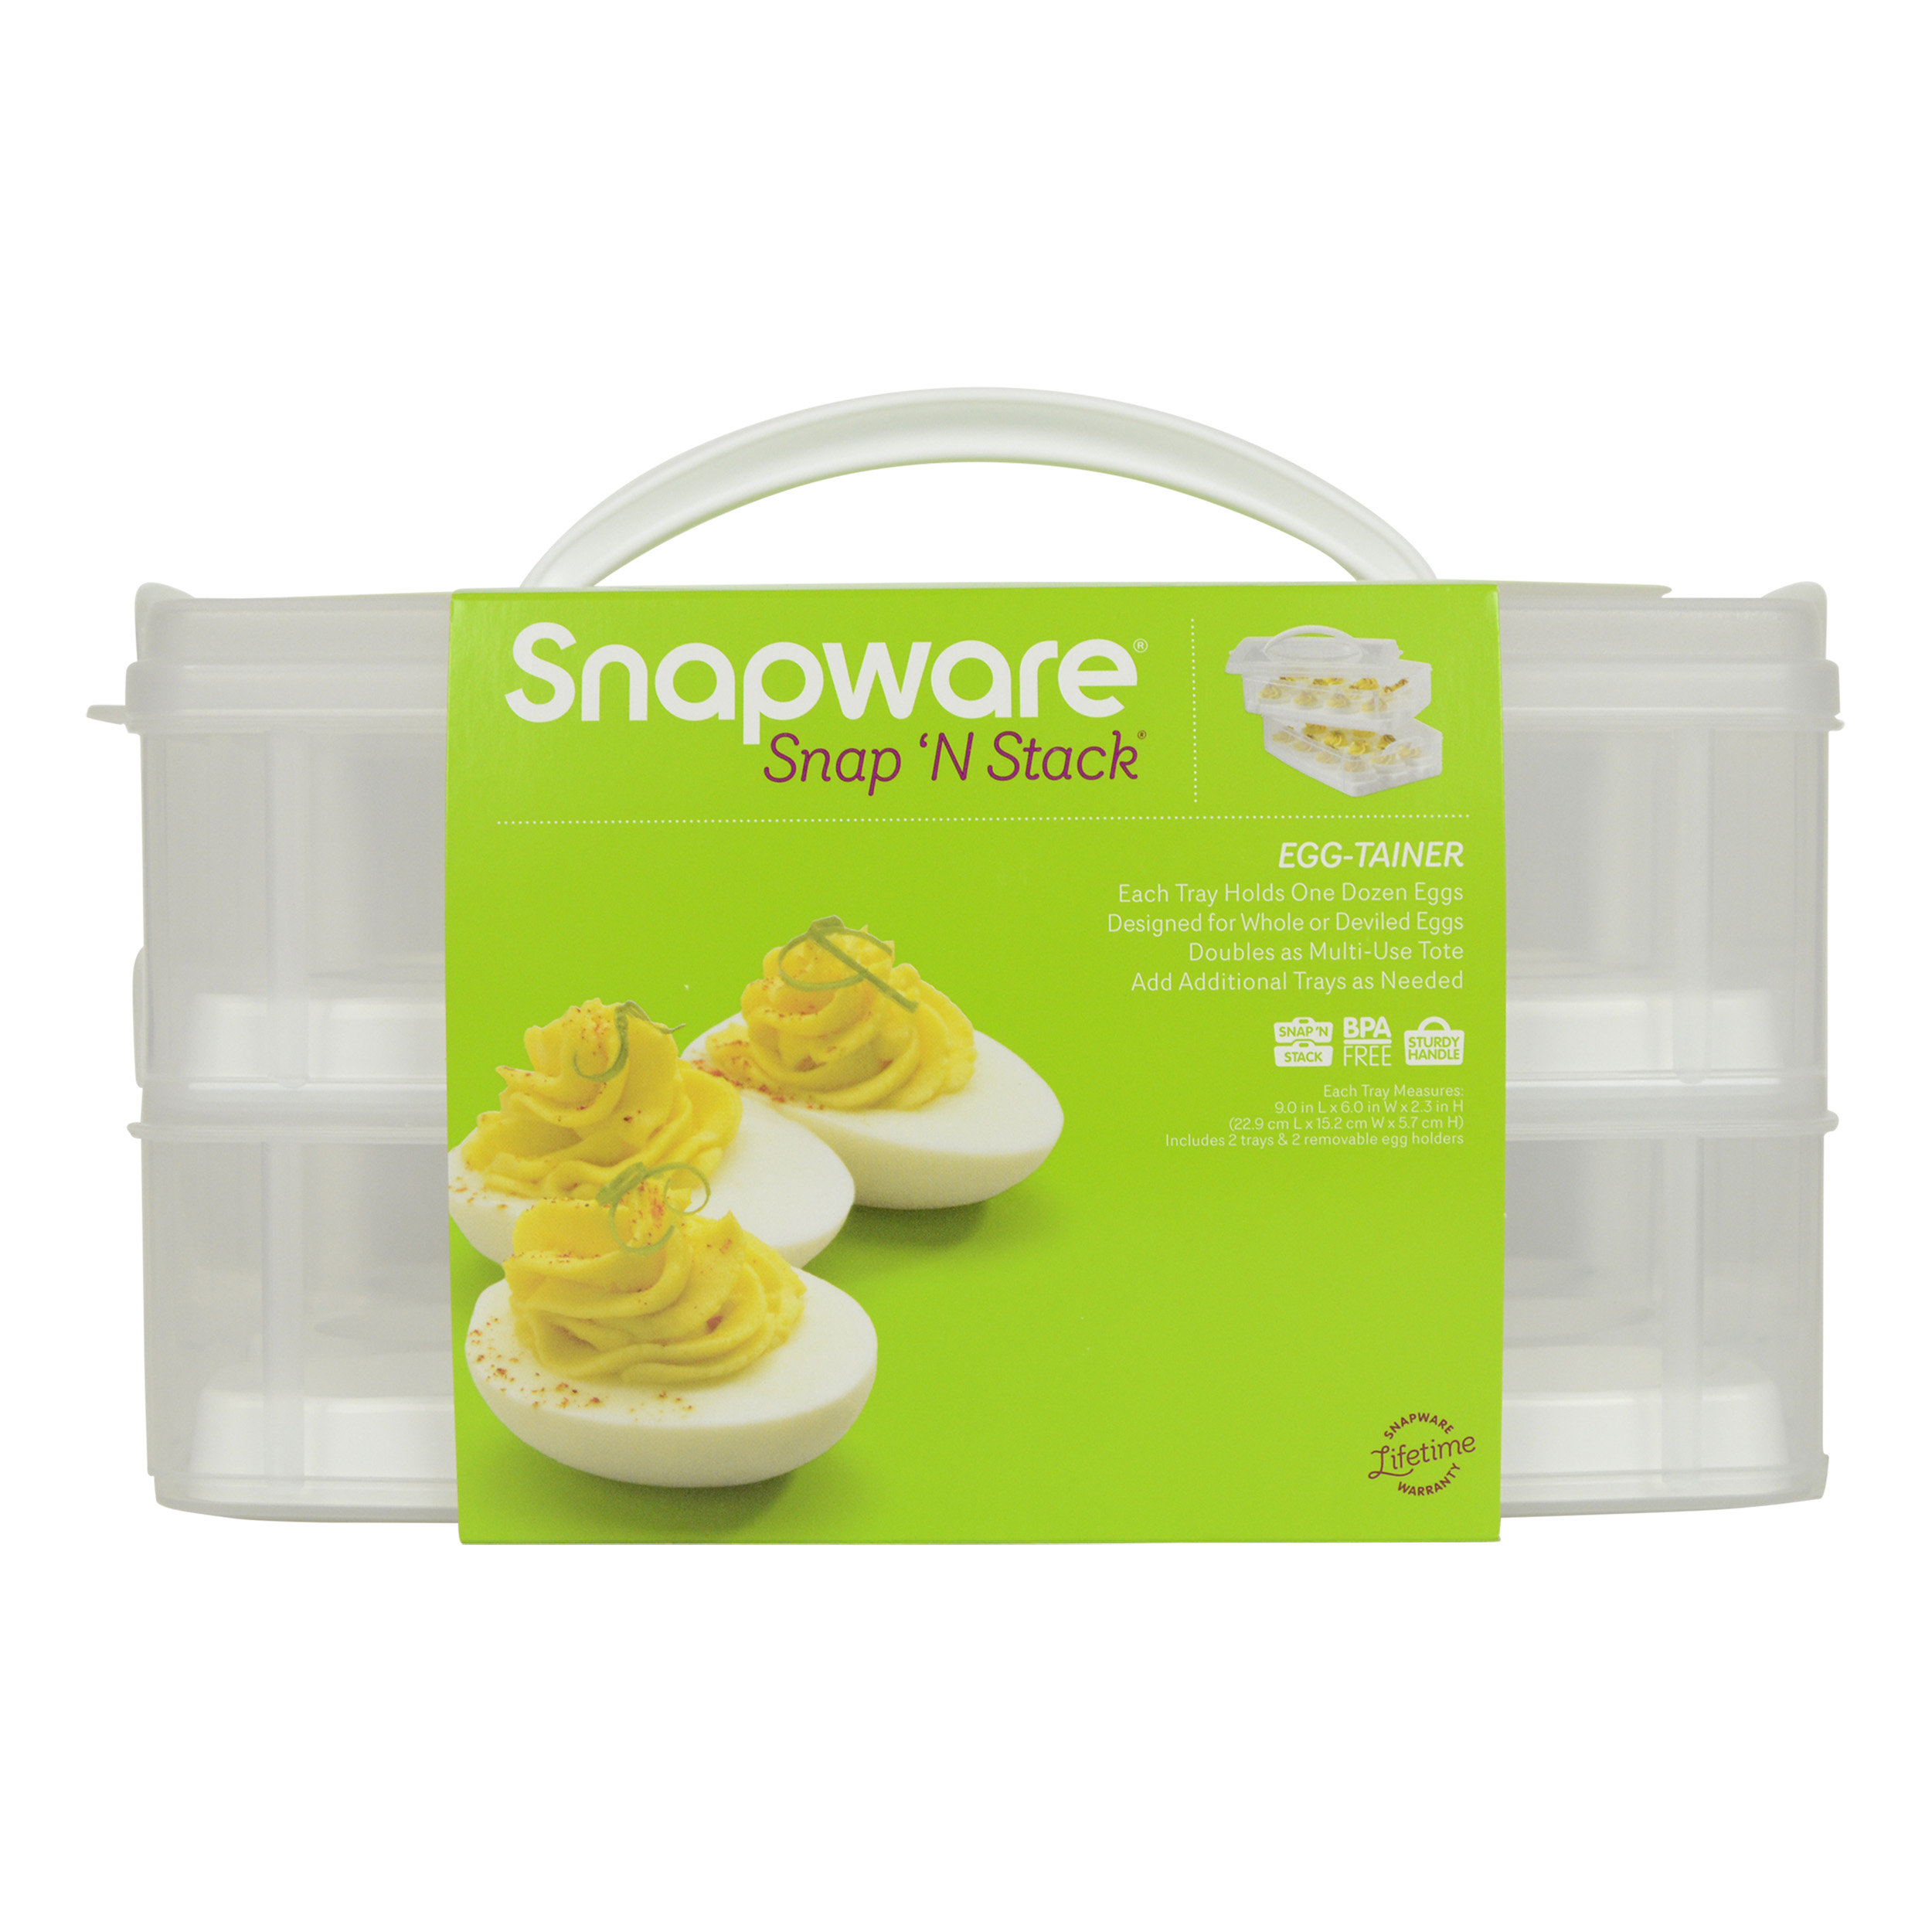 Snapware Red Food Storage Containers